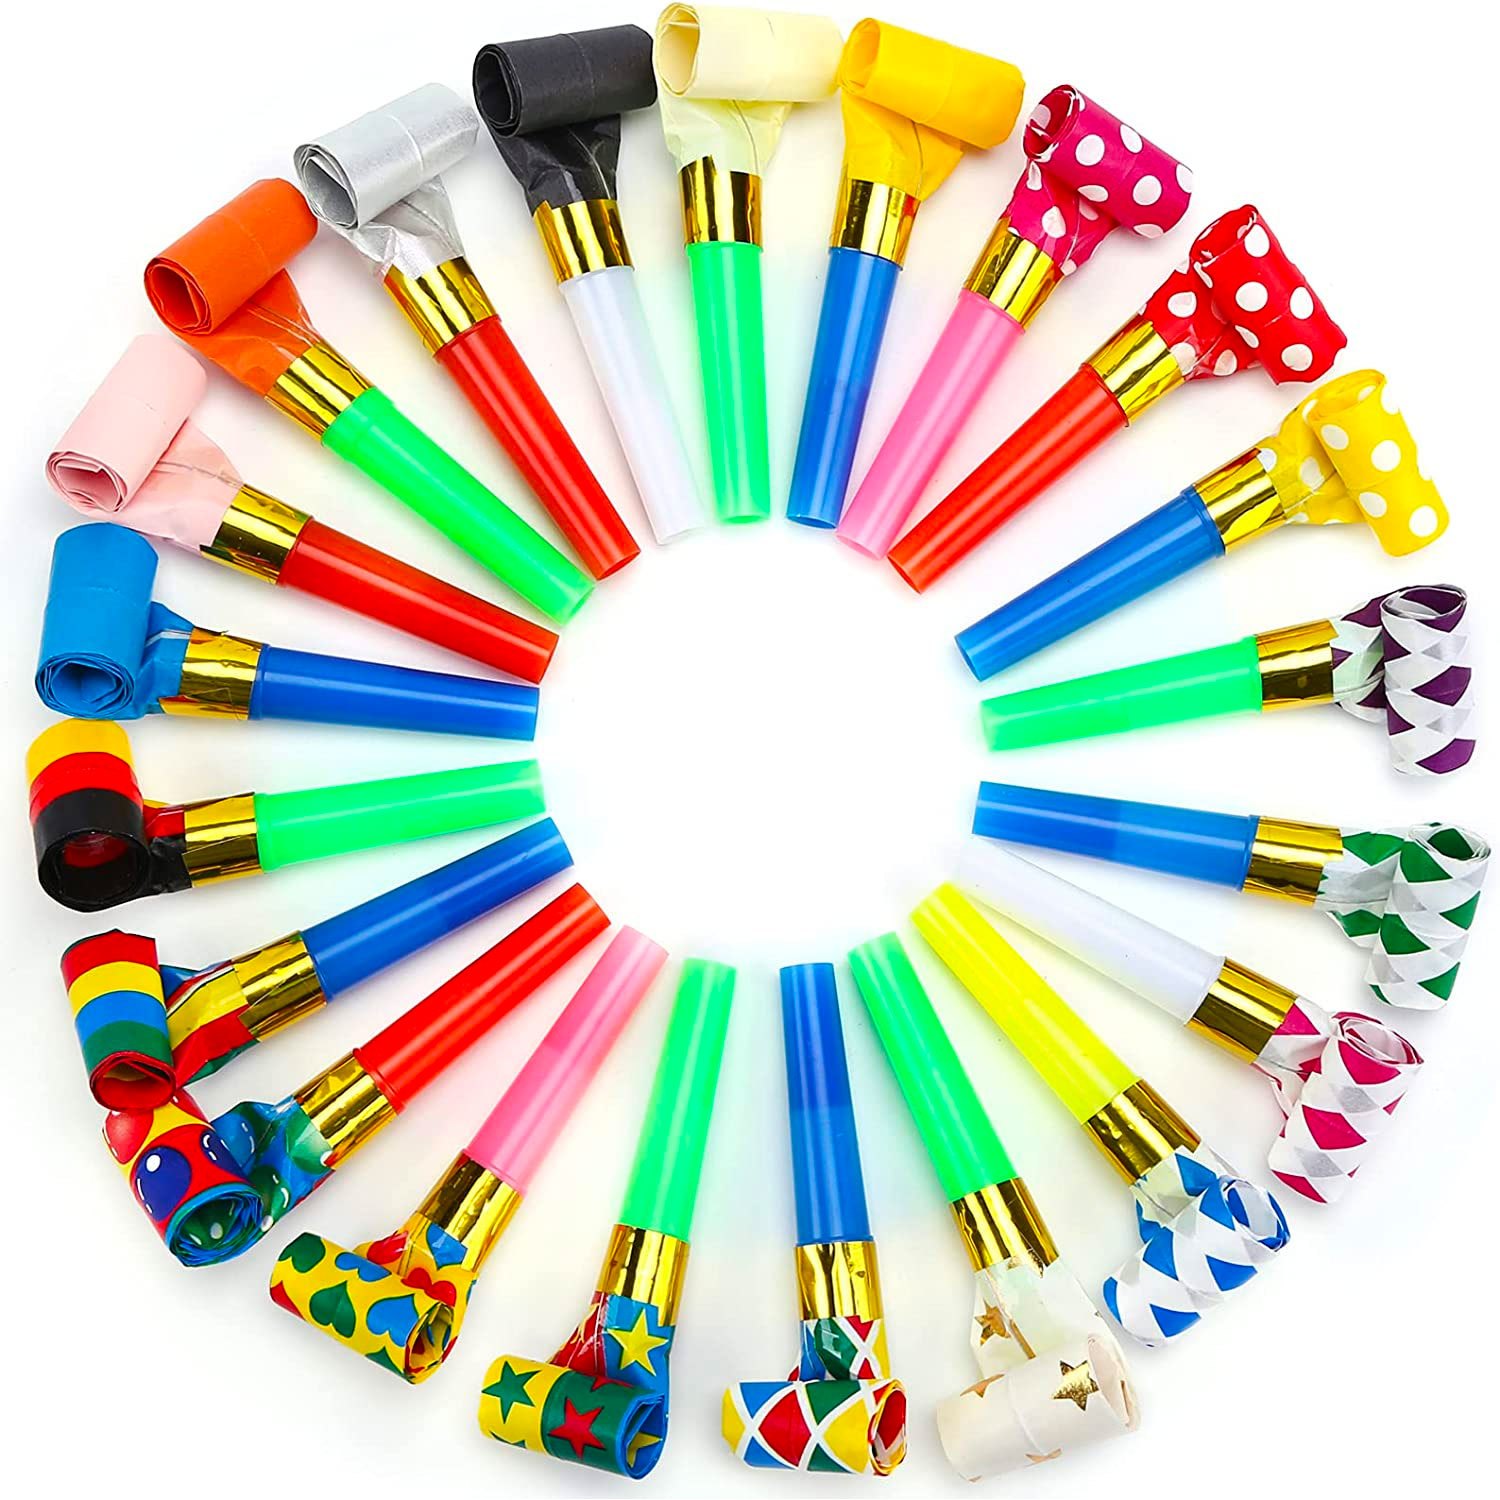 

21 Pcs Party Blower, Colorful Birthday Noisemakers Birthday Blow Horns Party Horns Party Whistles New Years Party Noisemakers Party Blowouts Whistles Party Blowouts Party Favors Noise Makers